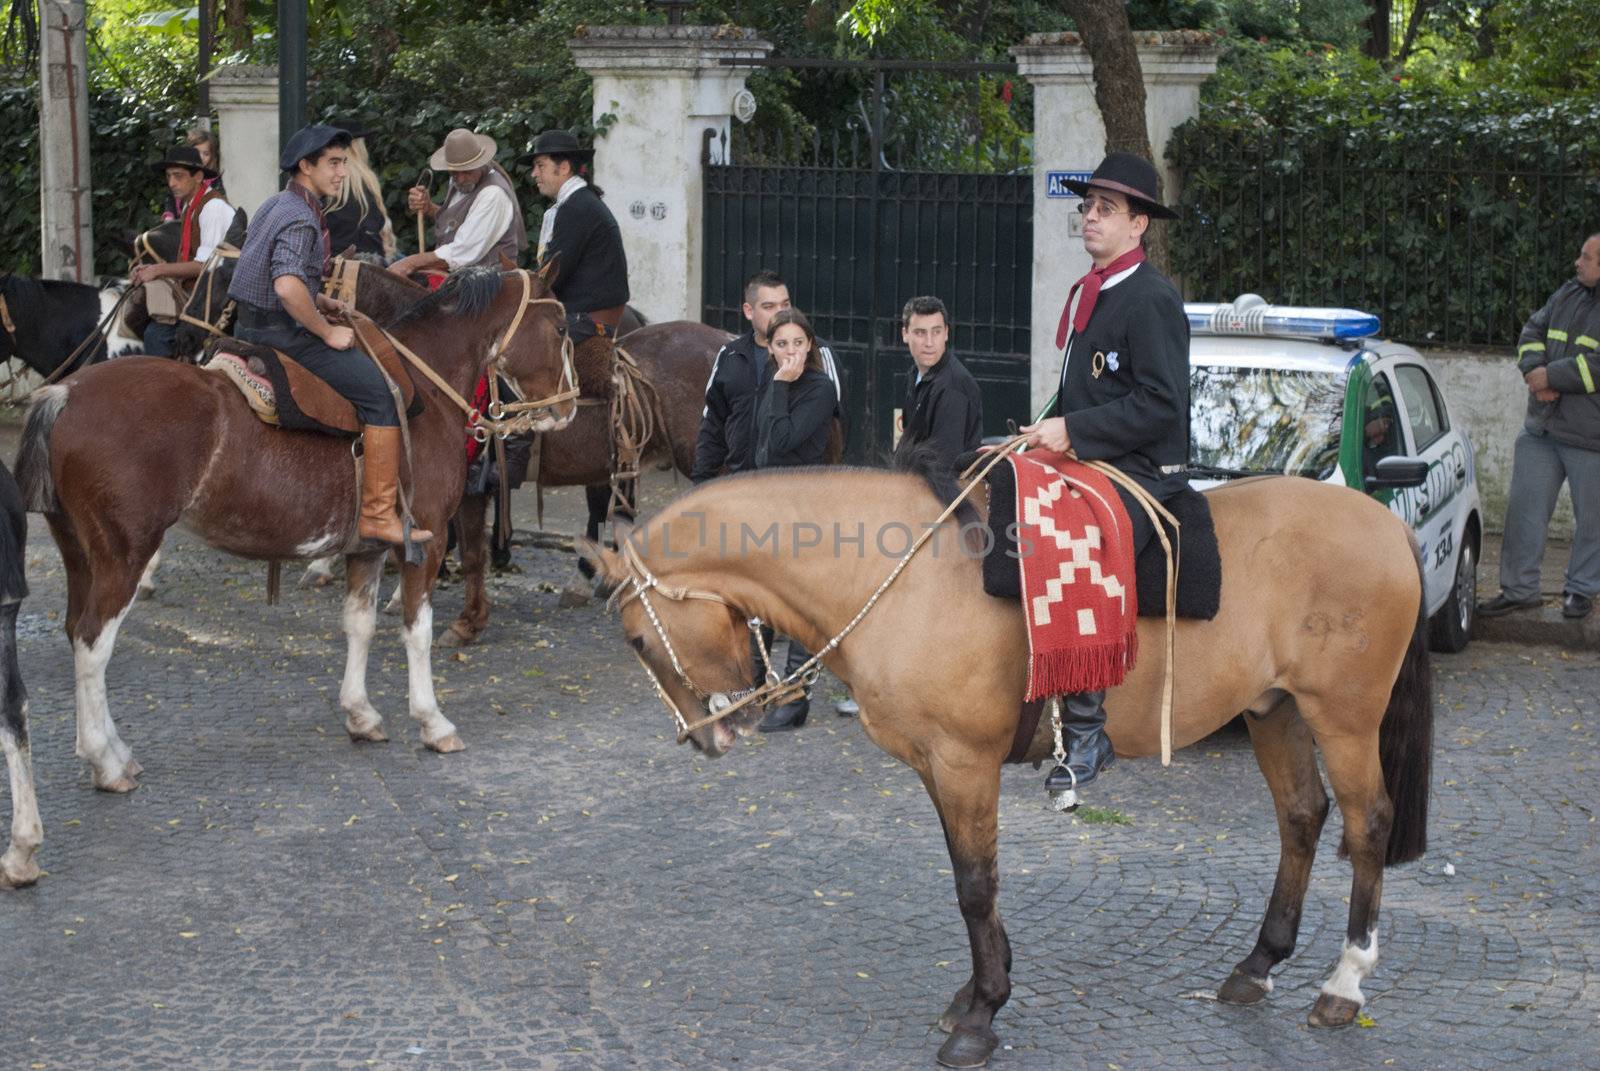 Argentine gauchos - 15 of May of 2012 by lauria